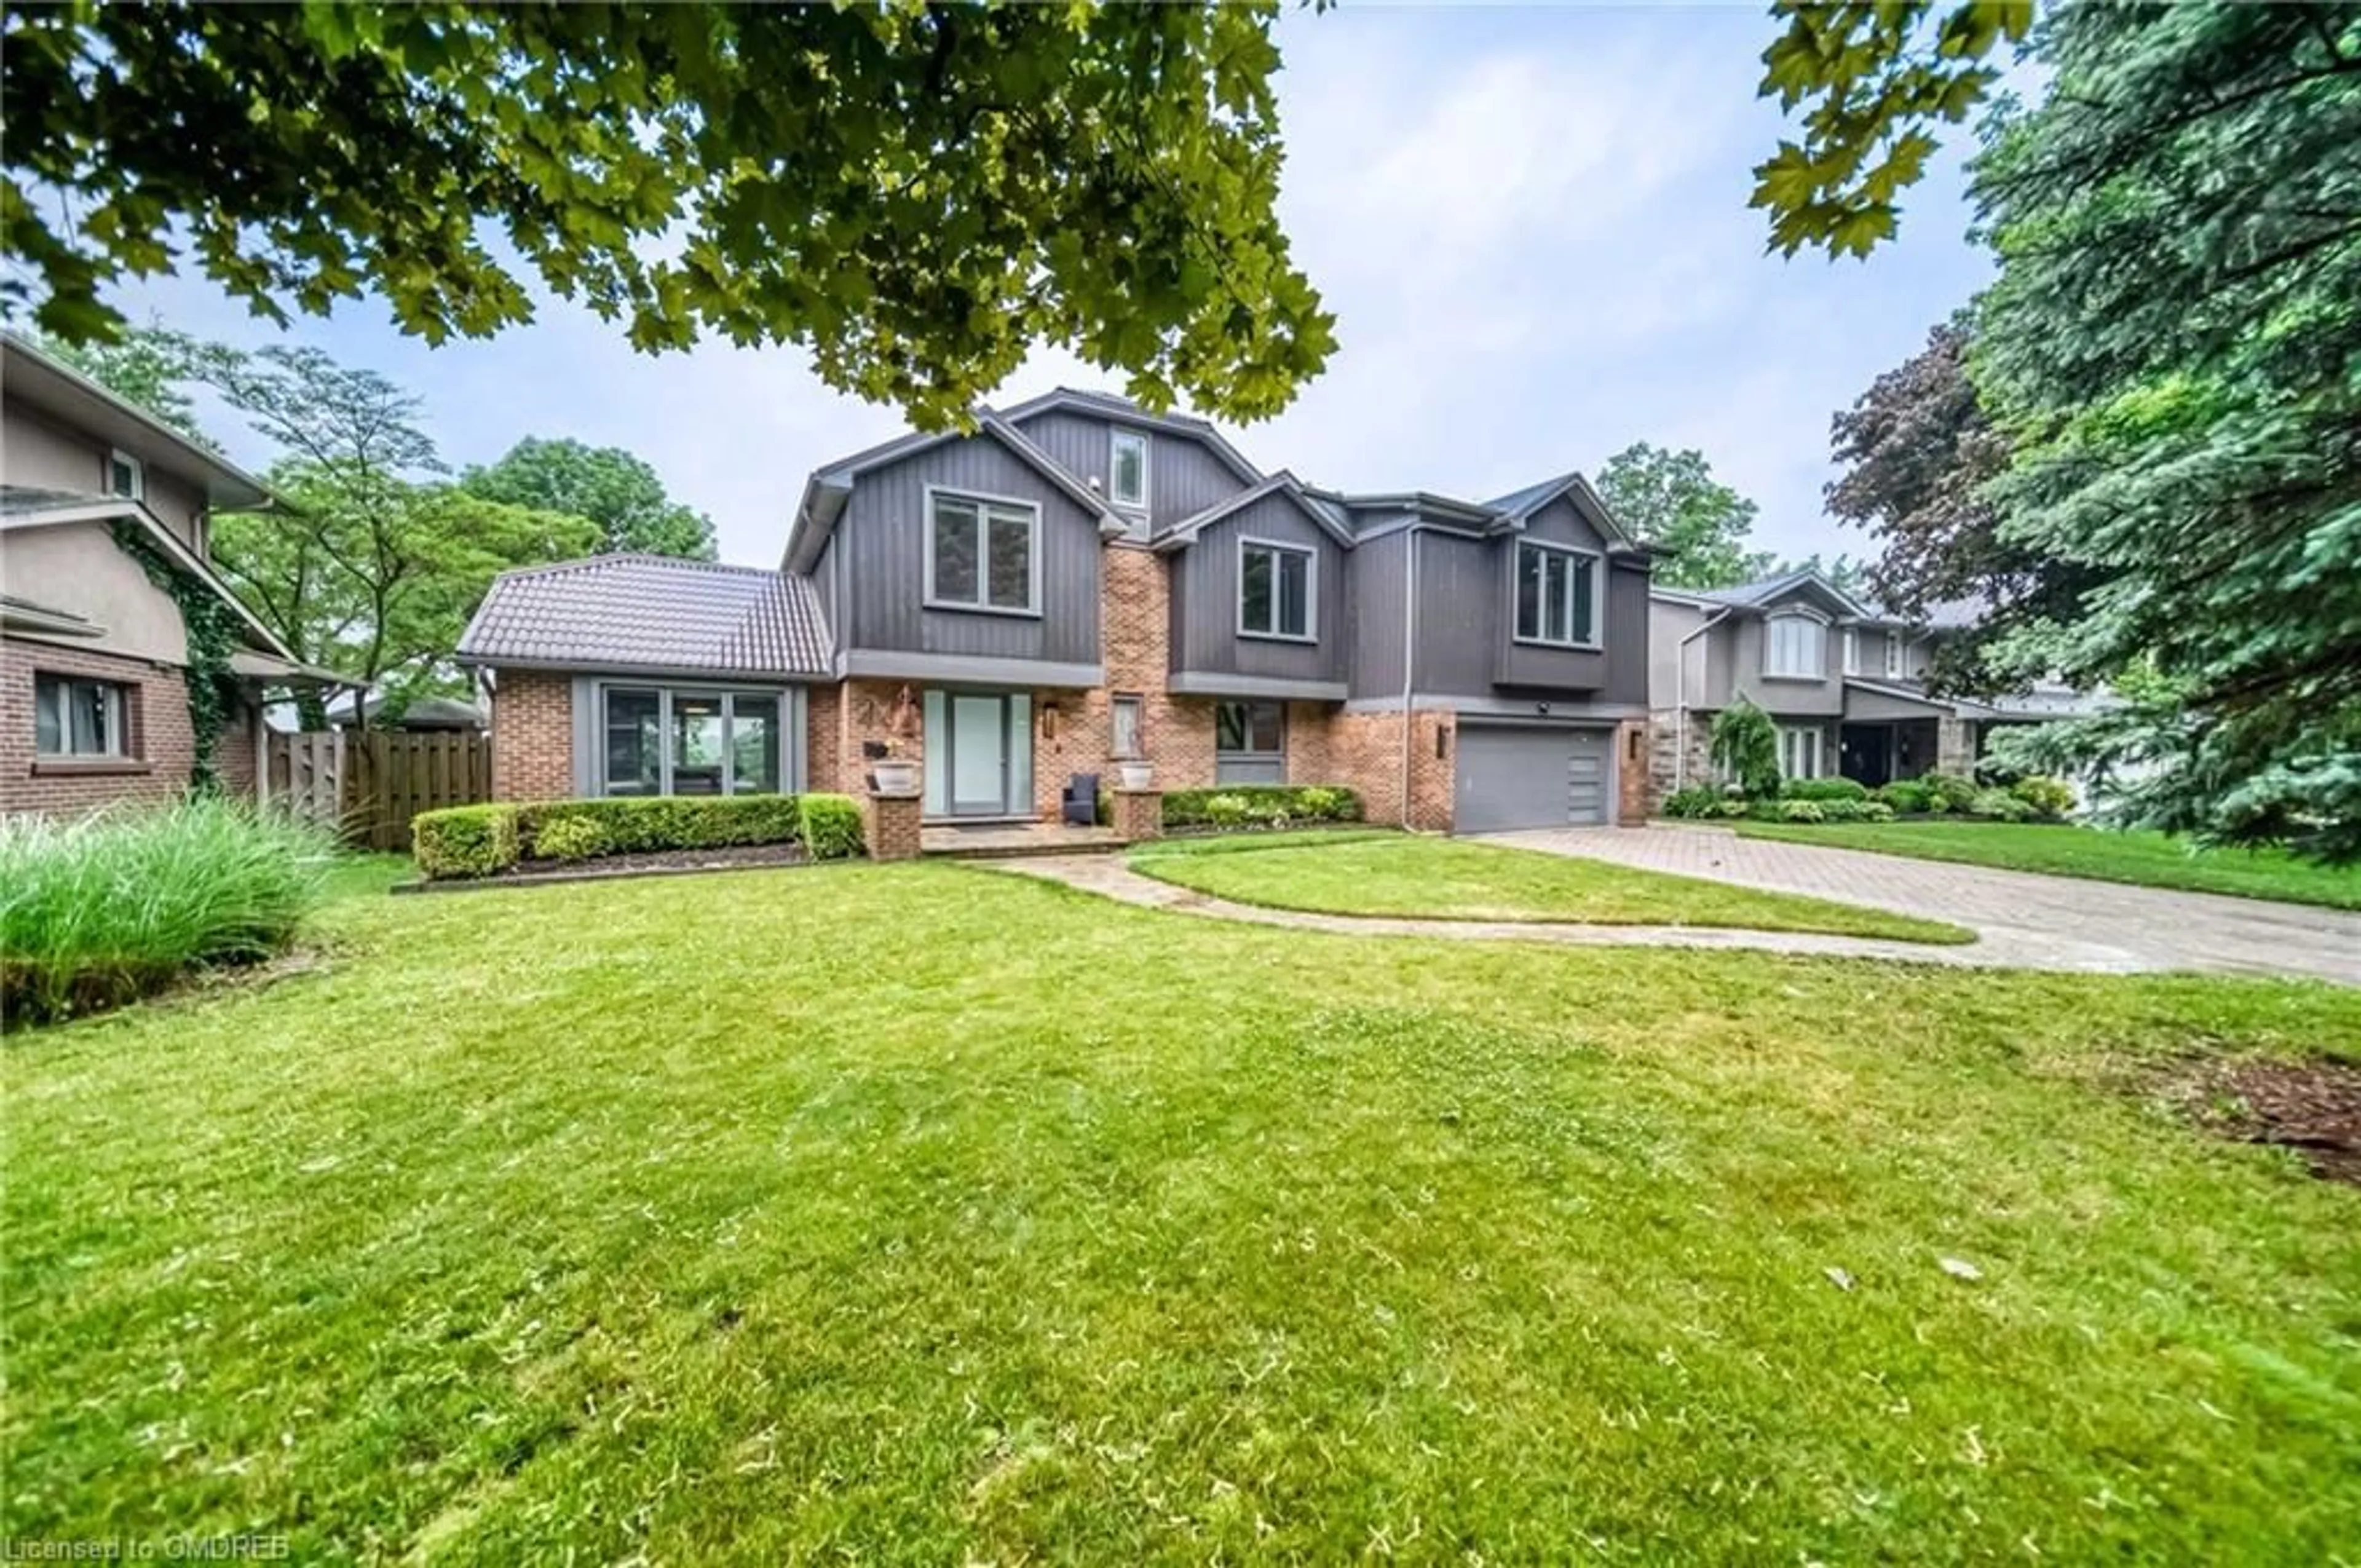 Home with brick exterior material for 44 Royal Henley Blvd, St. Catharines Ontario L2N 4S1